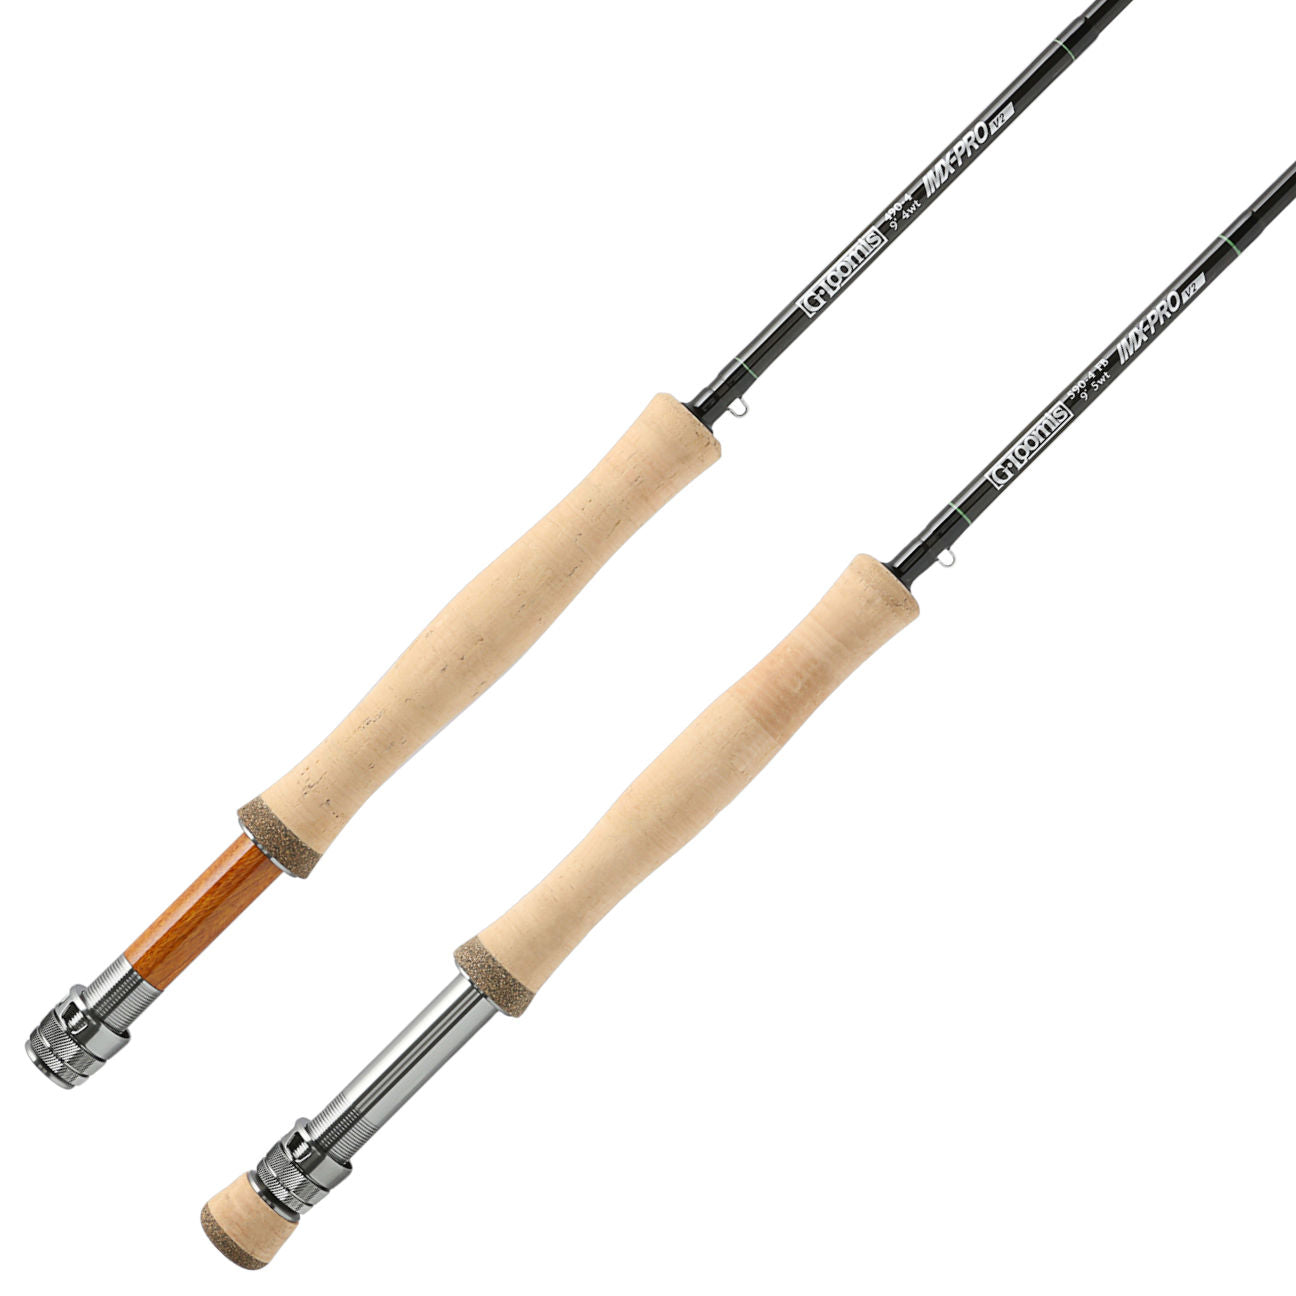 Dominate Freshwater with Three New Fly Rods from G. Loomis – G